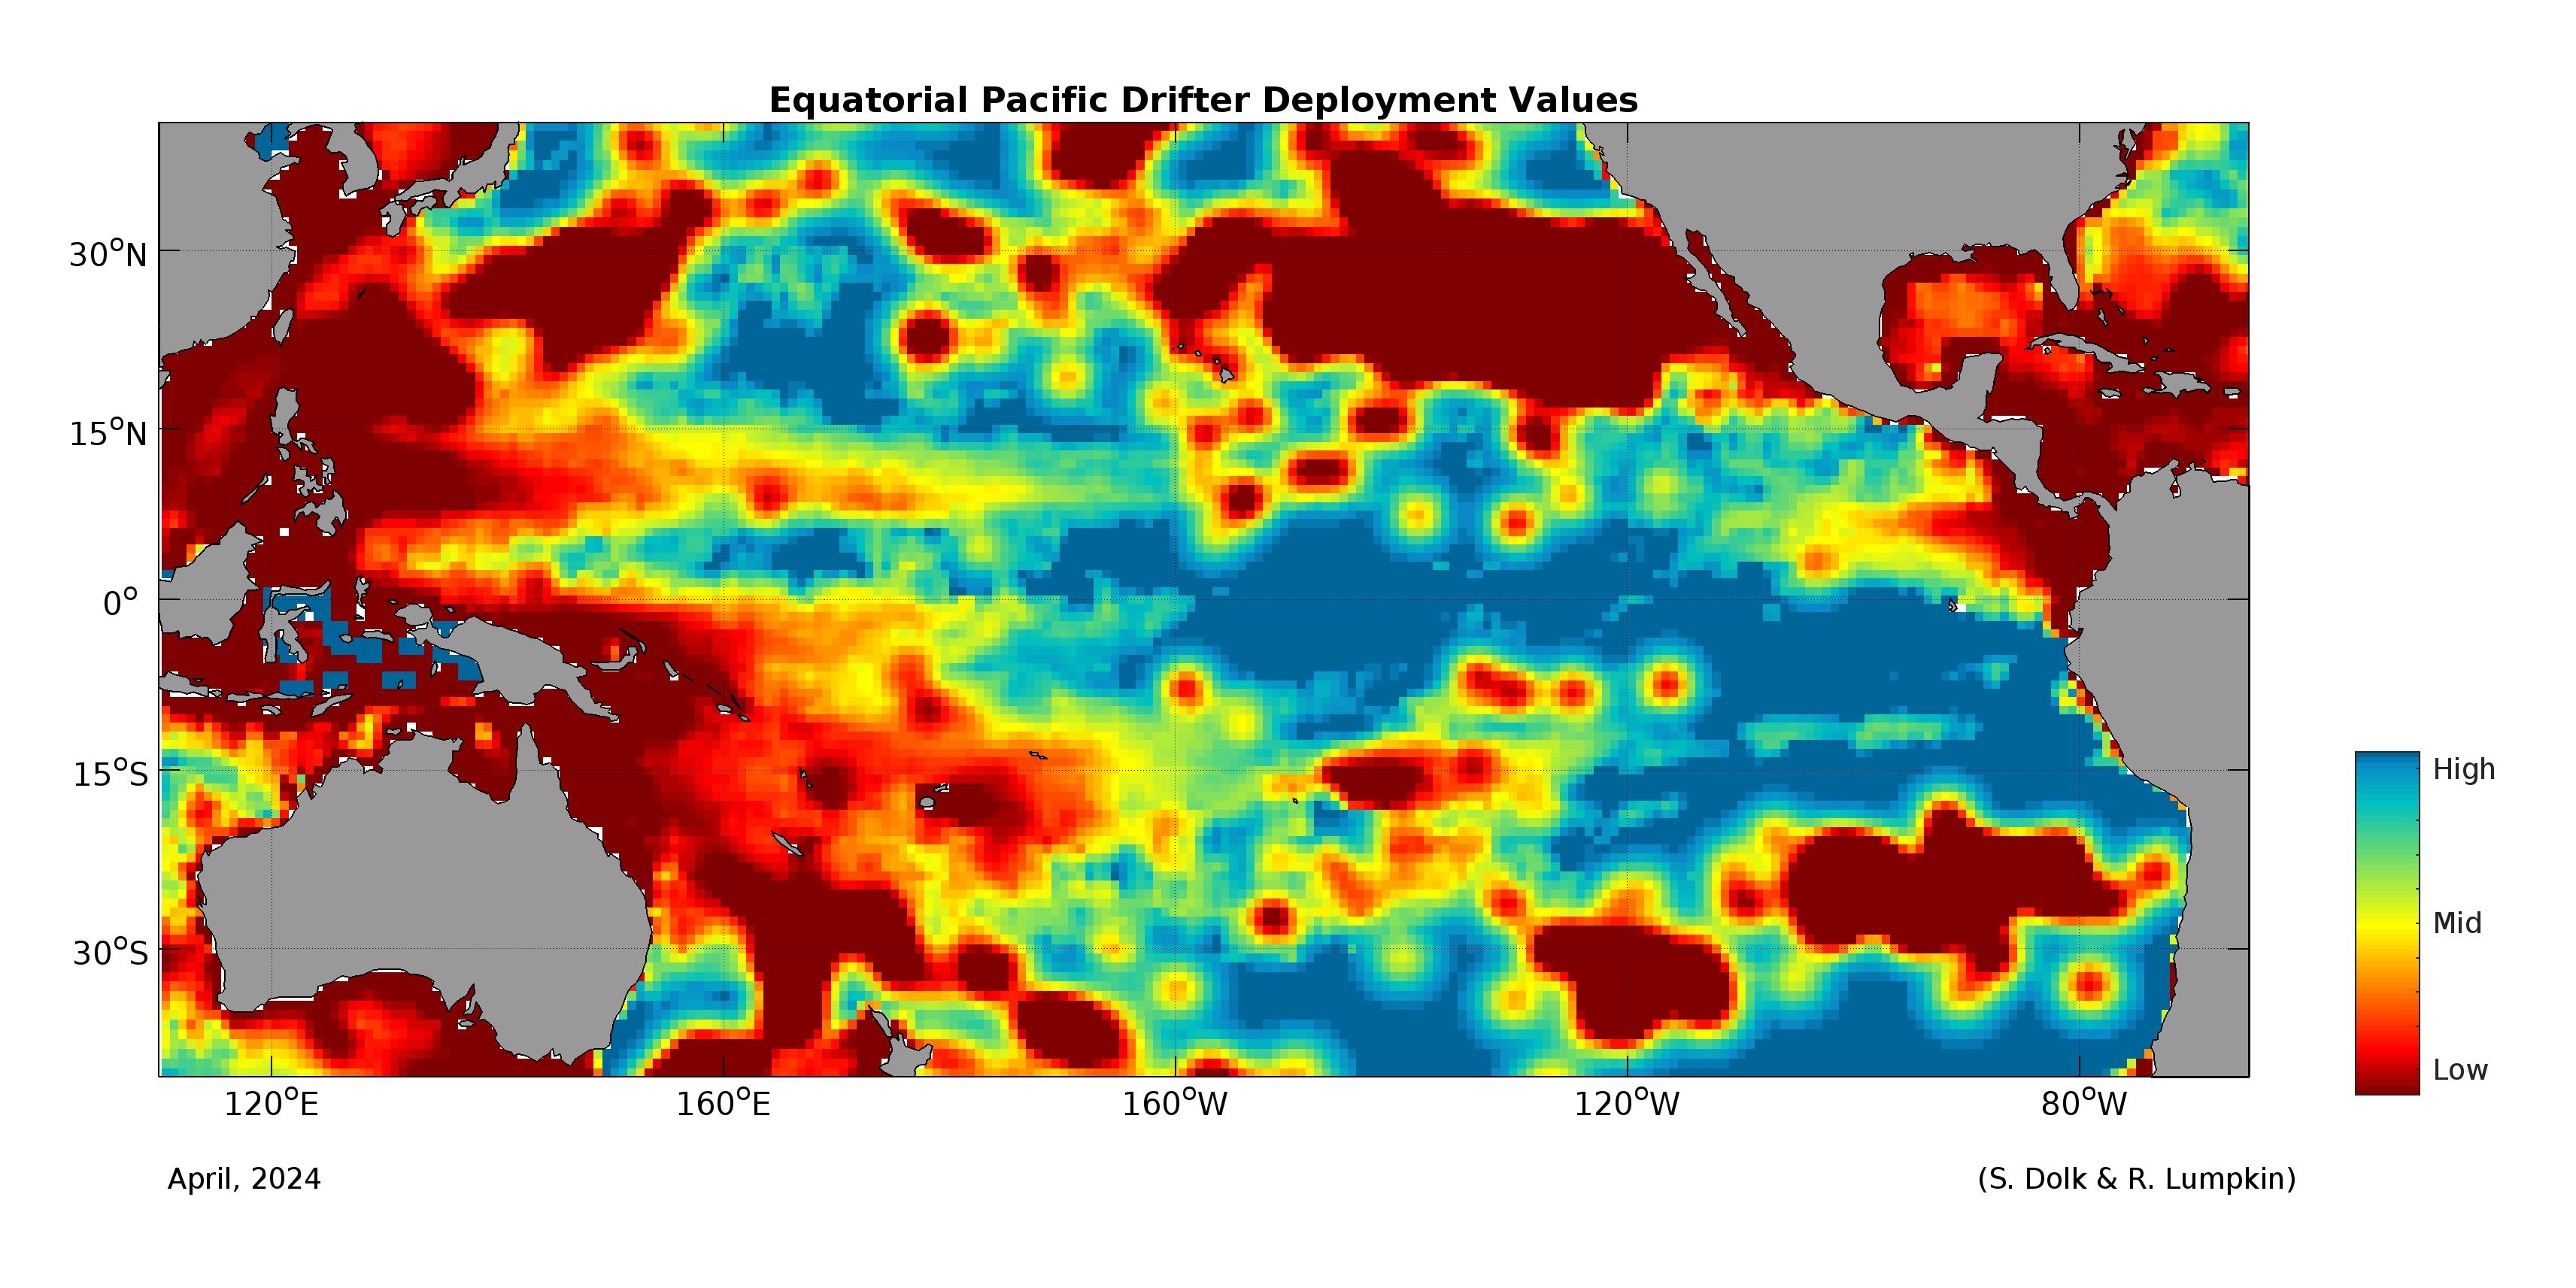 Global Drifter Equatorial Pacific Deployment Value Map. Image Credit, NOAA. 